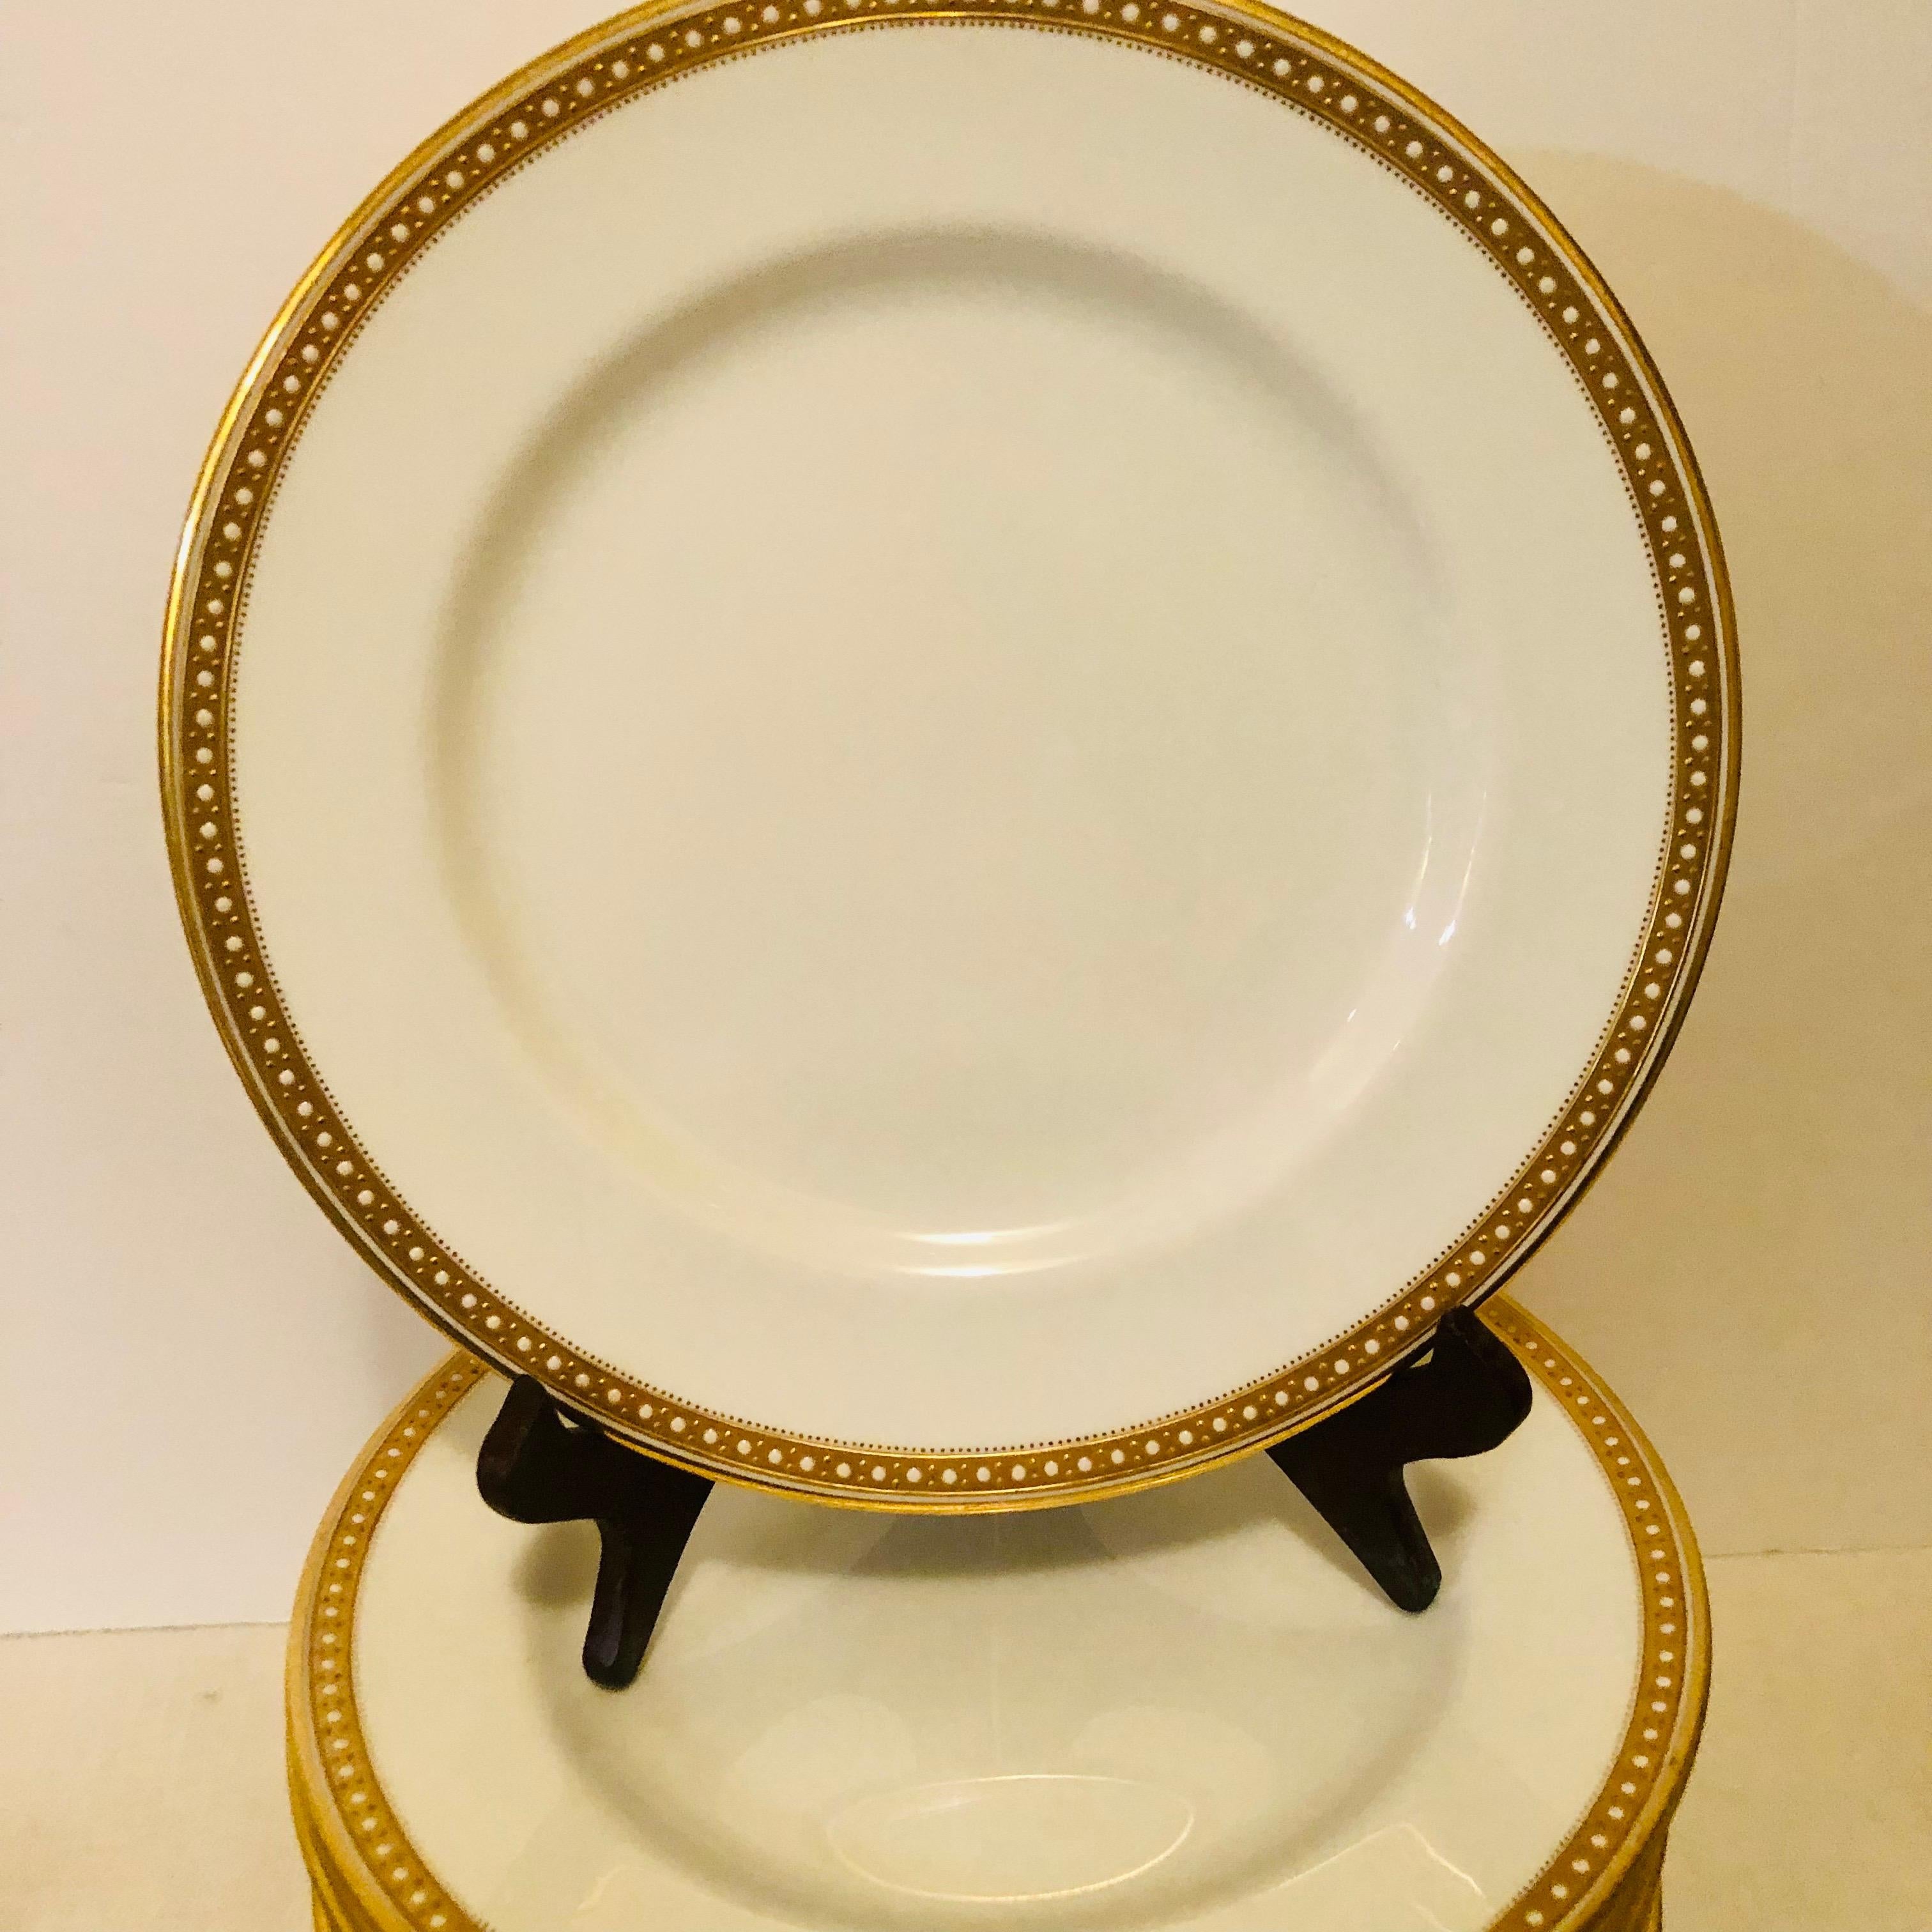 I am offering you this exquisite set of six Copeland Spode dinner plates which have a gold border and white enamel jeweling on a white porcelain body. They definitely look like simple elegance, and they would look beautiful with any dinnerware you